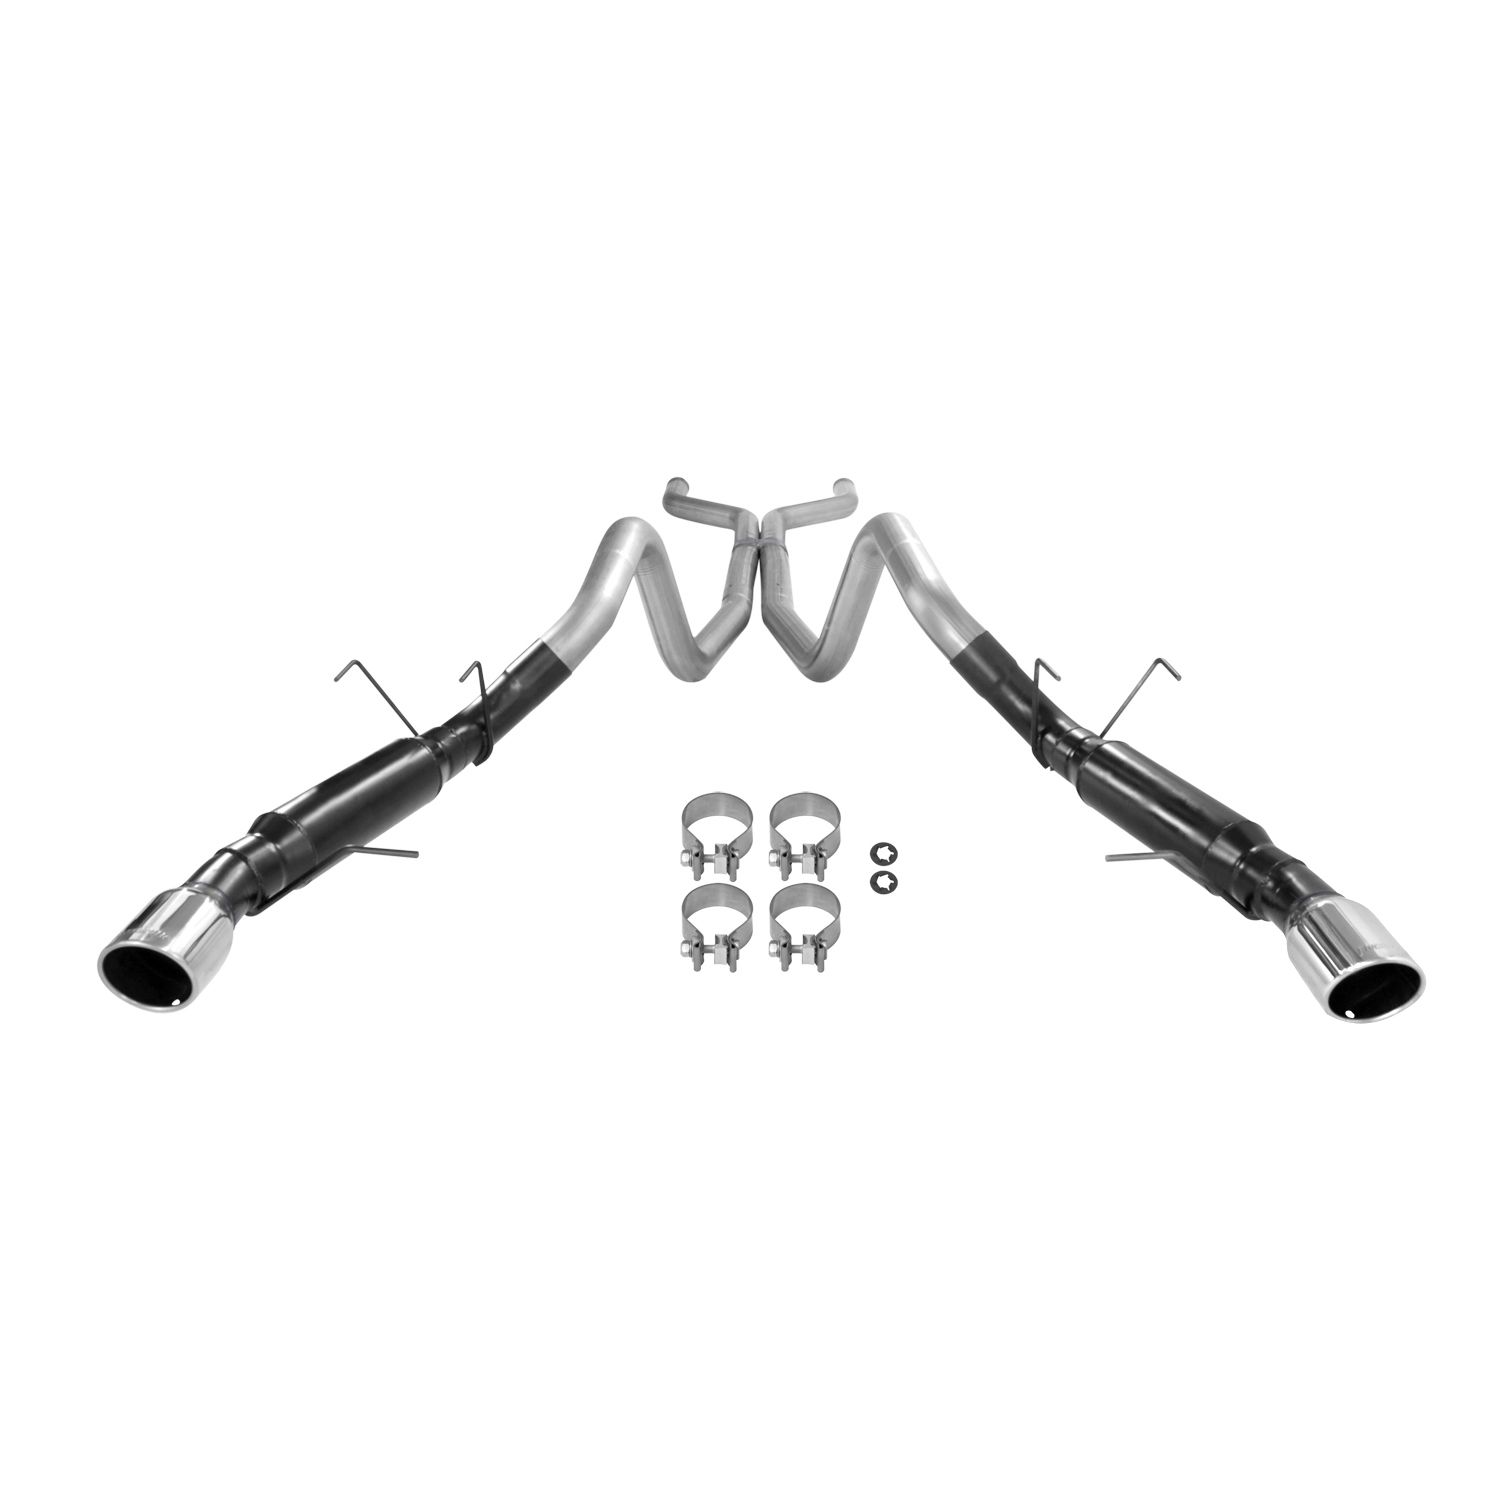 2011-2012 Ford Mustang GT 5.0L Flowmaster Outlaw Cat-Back Exhaust